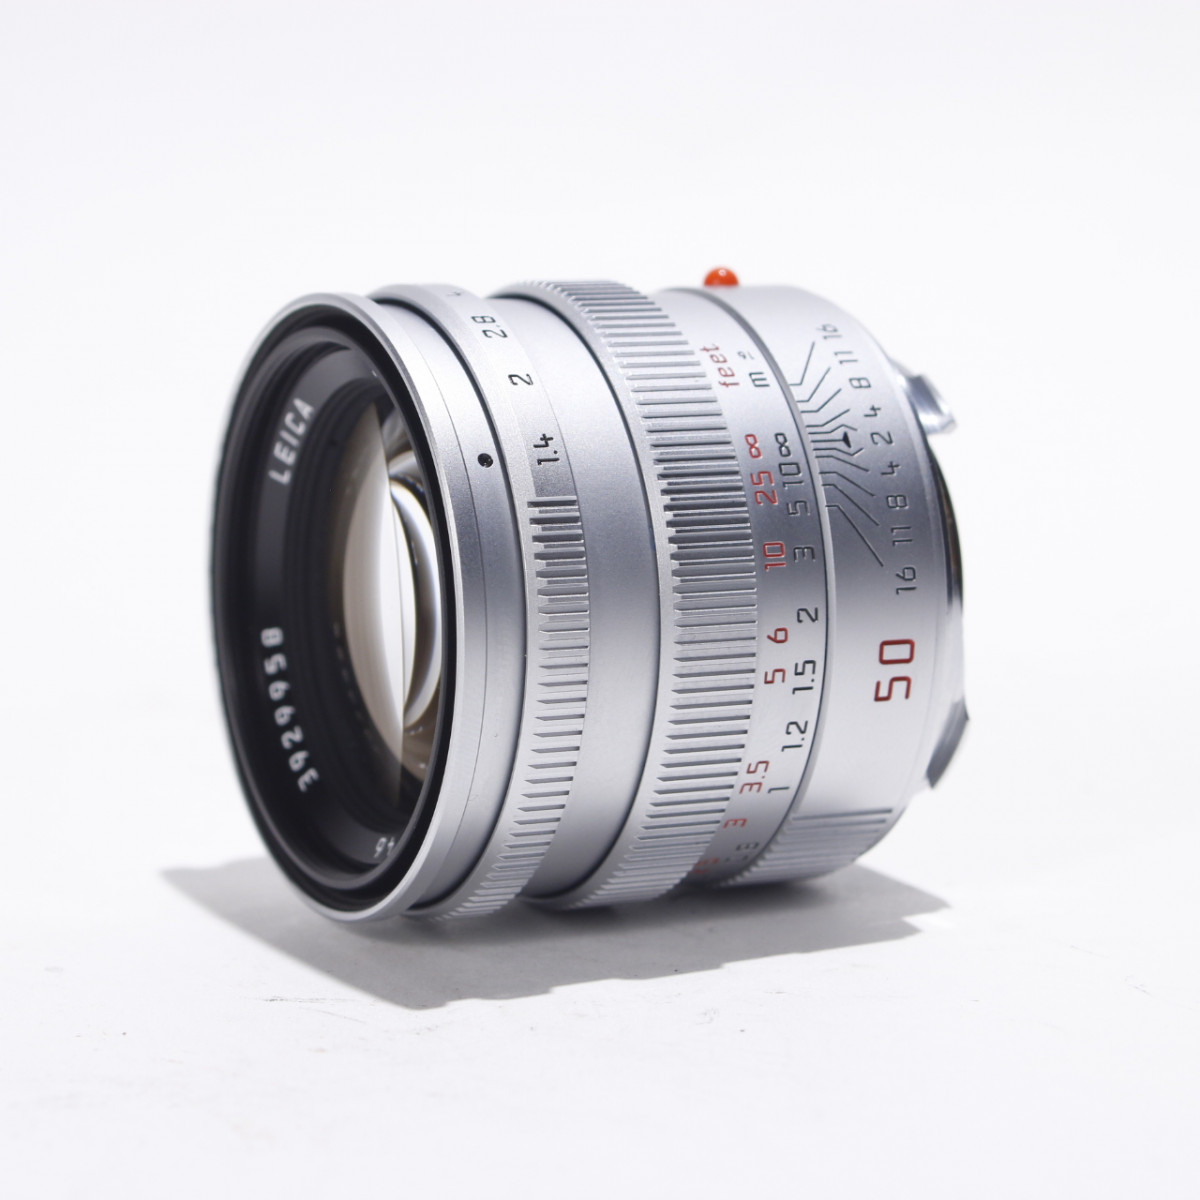 There's Something Very Special About This Leica 50mm F1.4 Lens